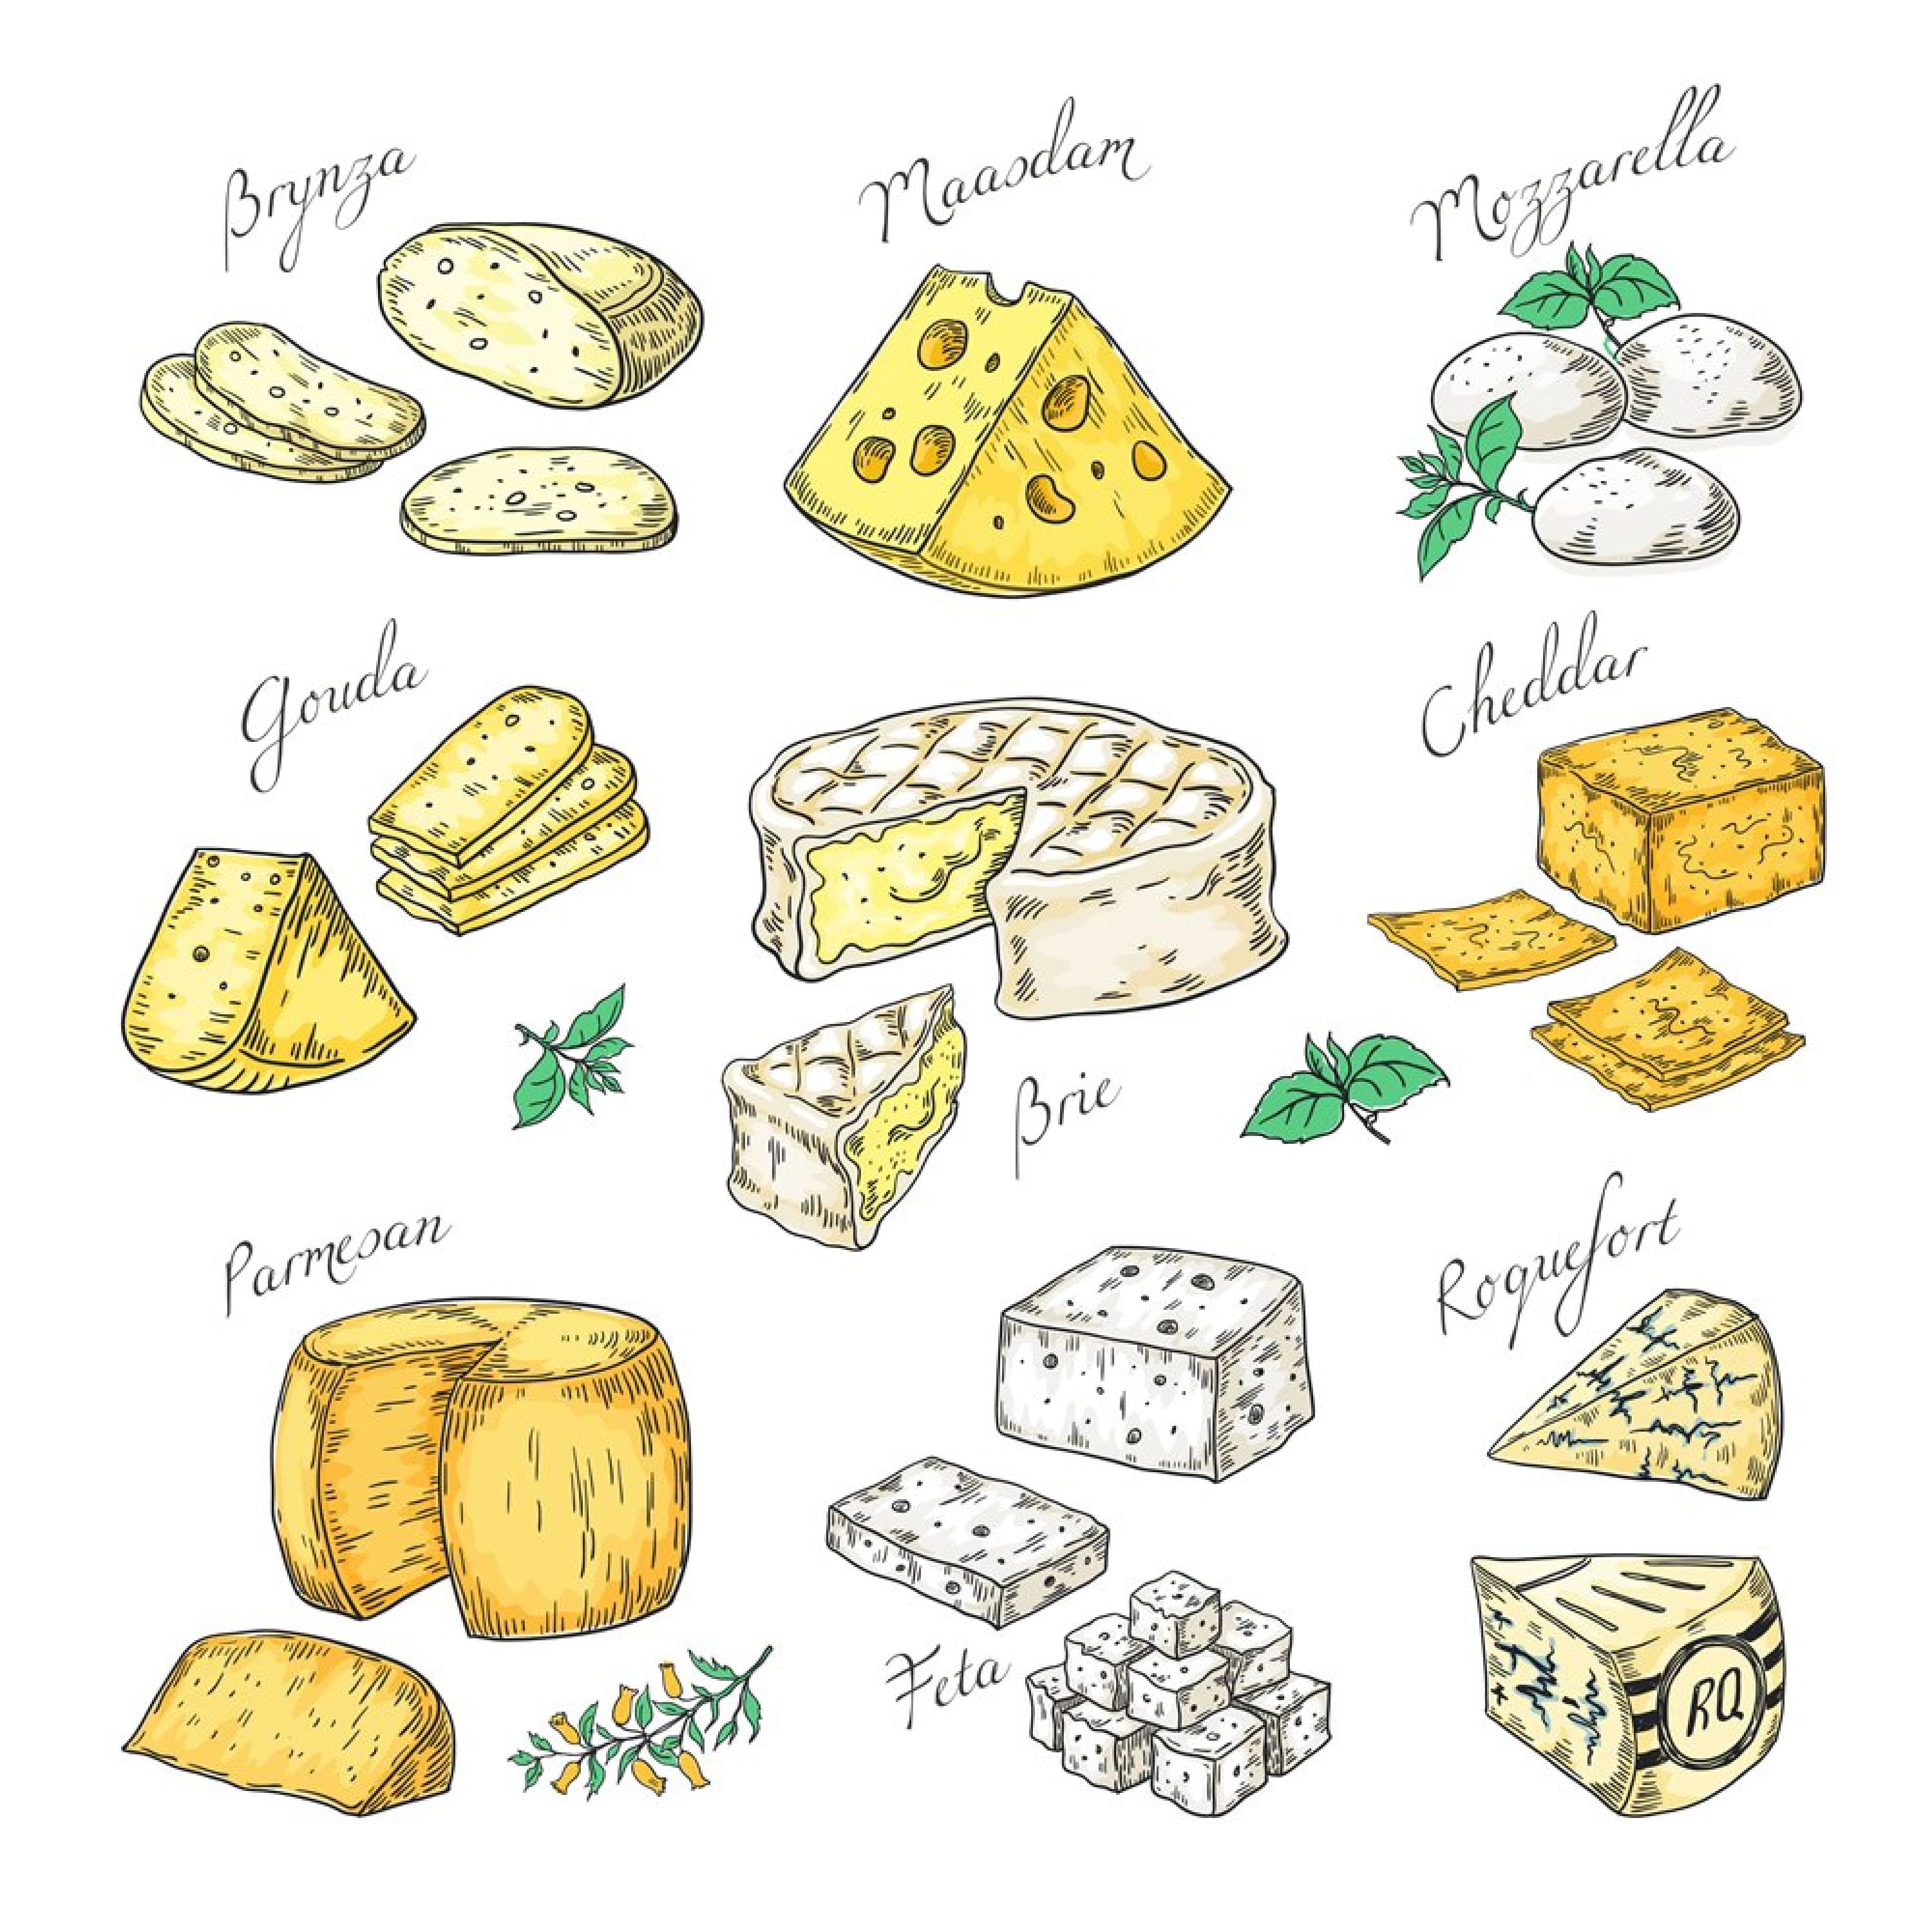 Collection of hand-drawn images of different varieties of cheeses.